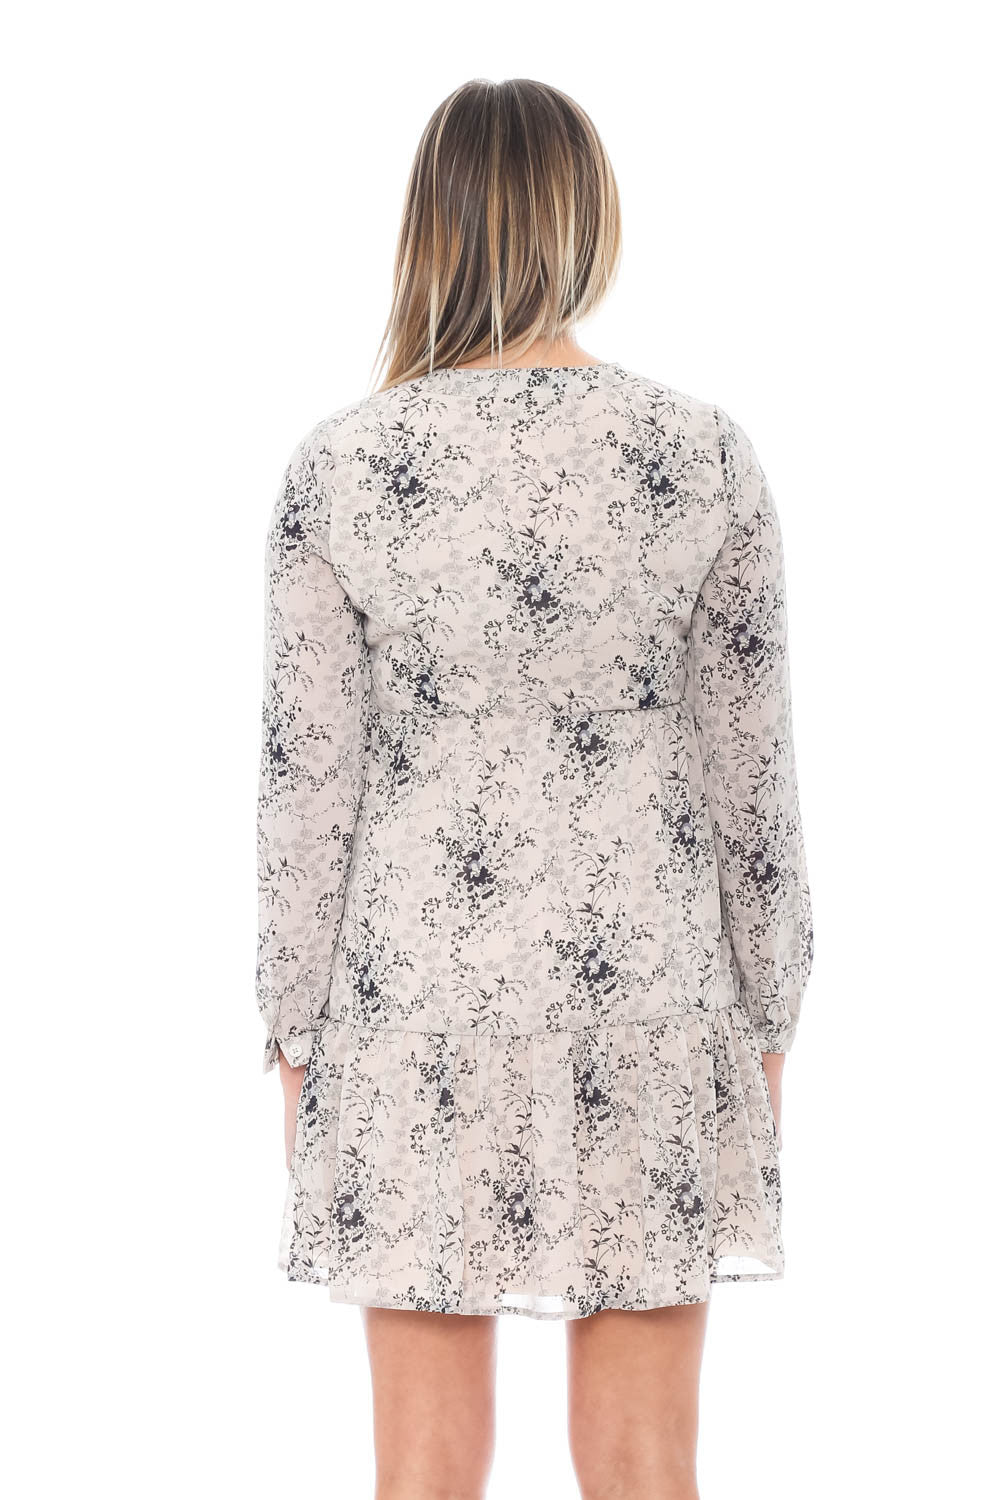 Dress - Long Sleeve Floral Lace Up Dress by Paper Crane